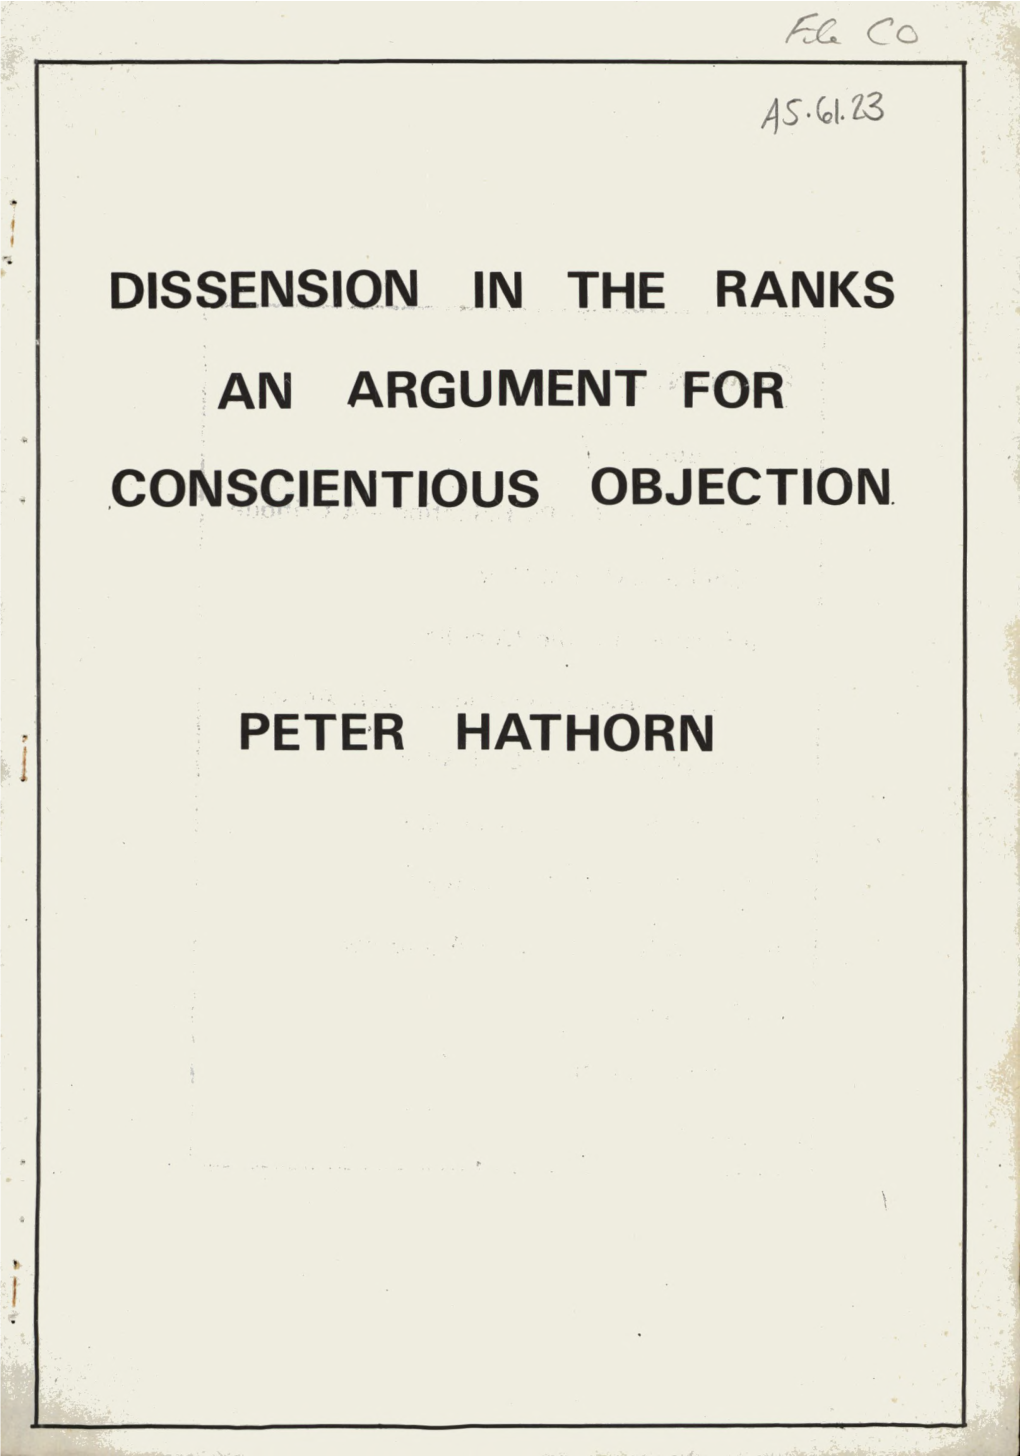 Dissension in the Ranks an Argument for Conscientious Objection